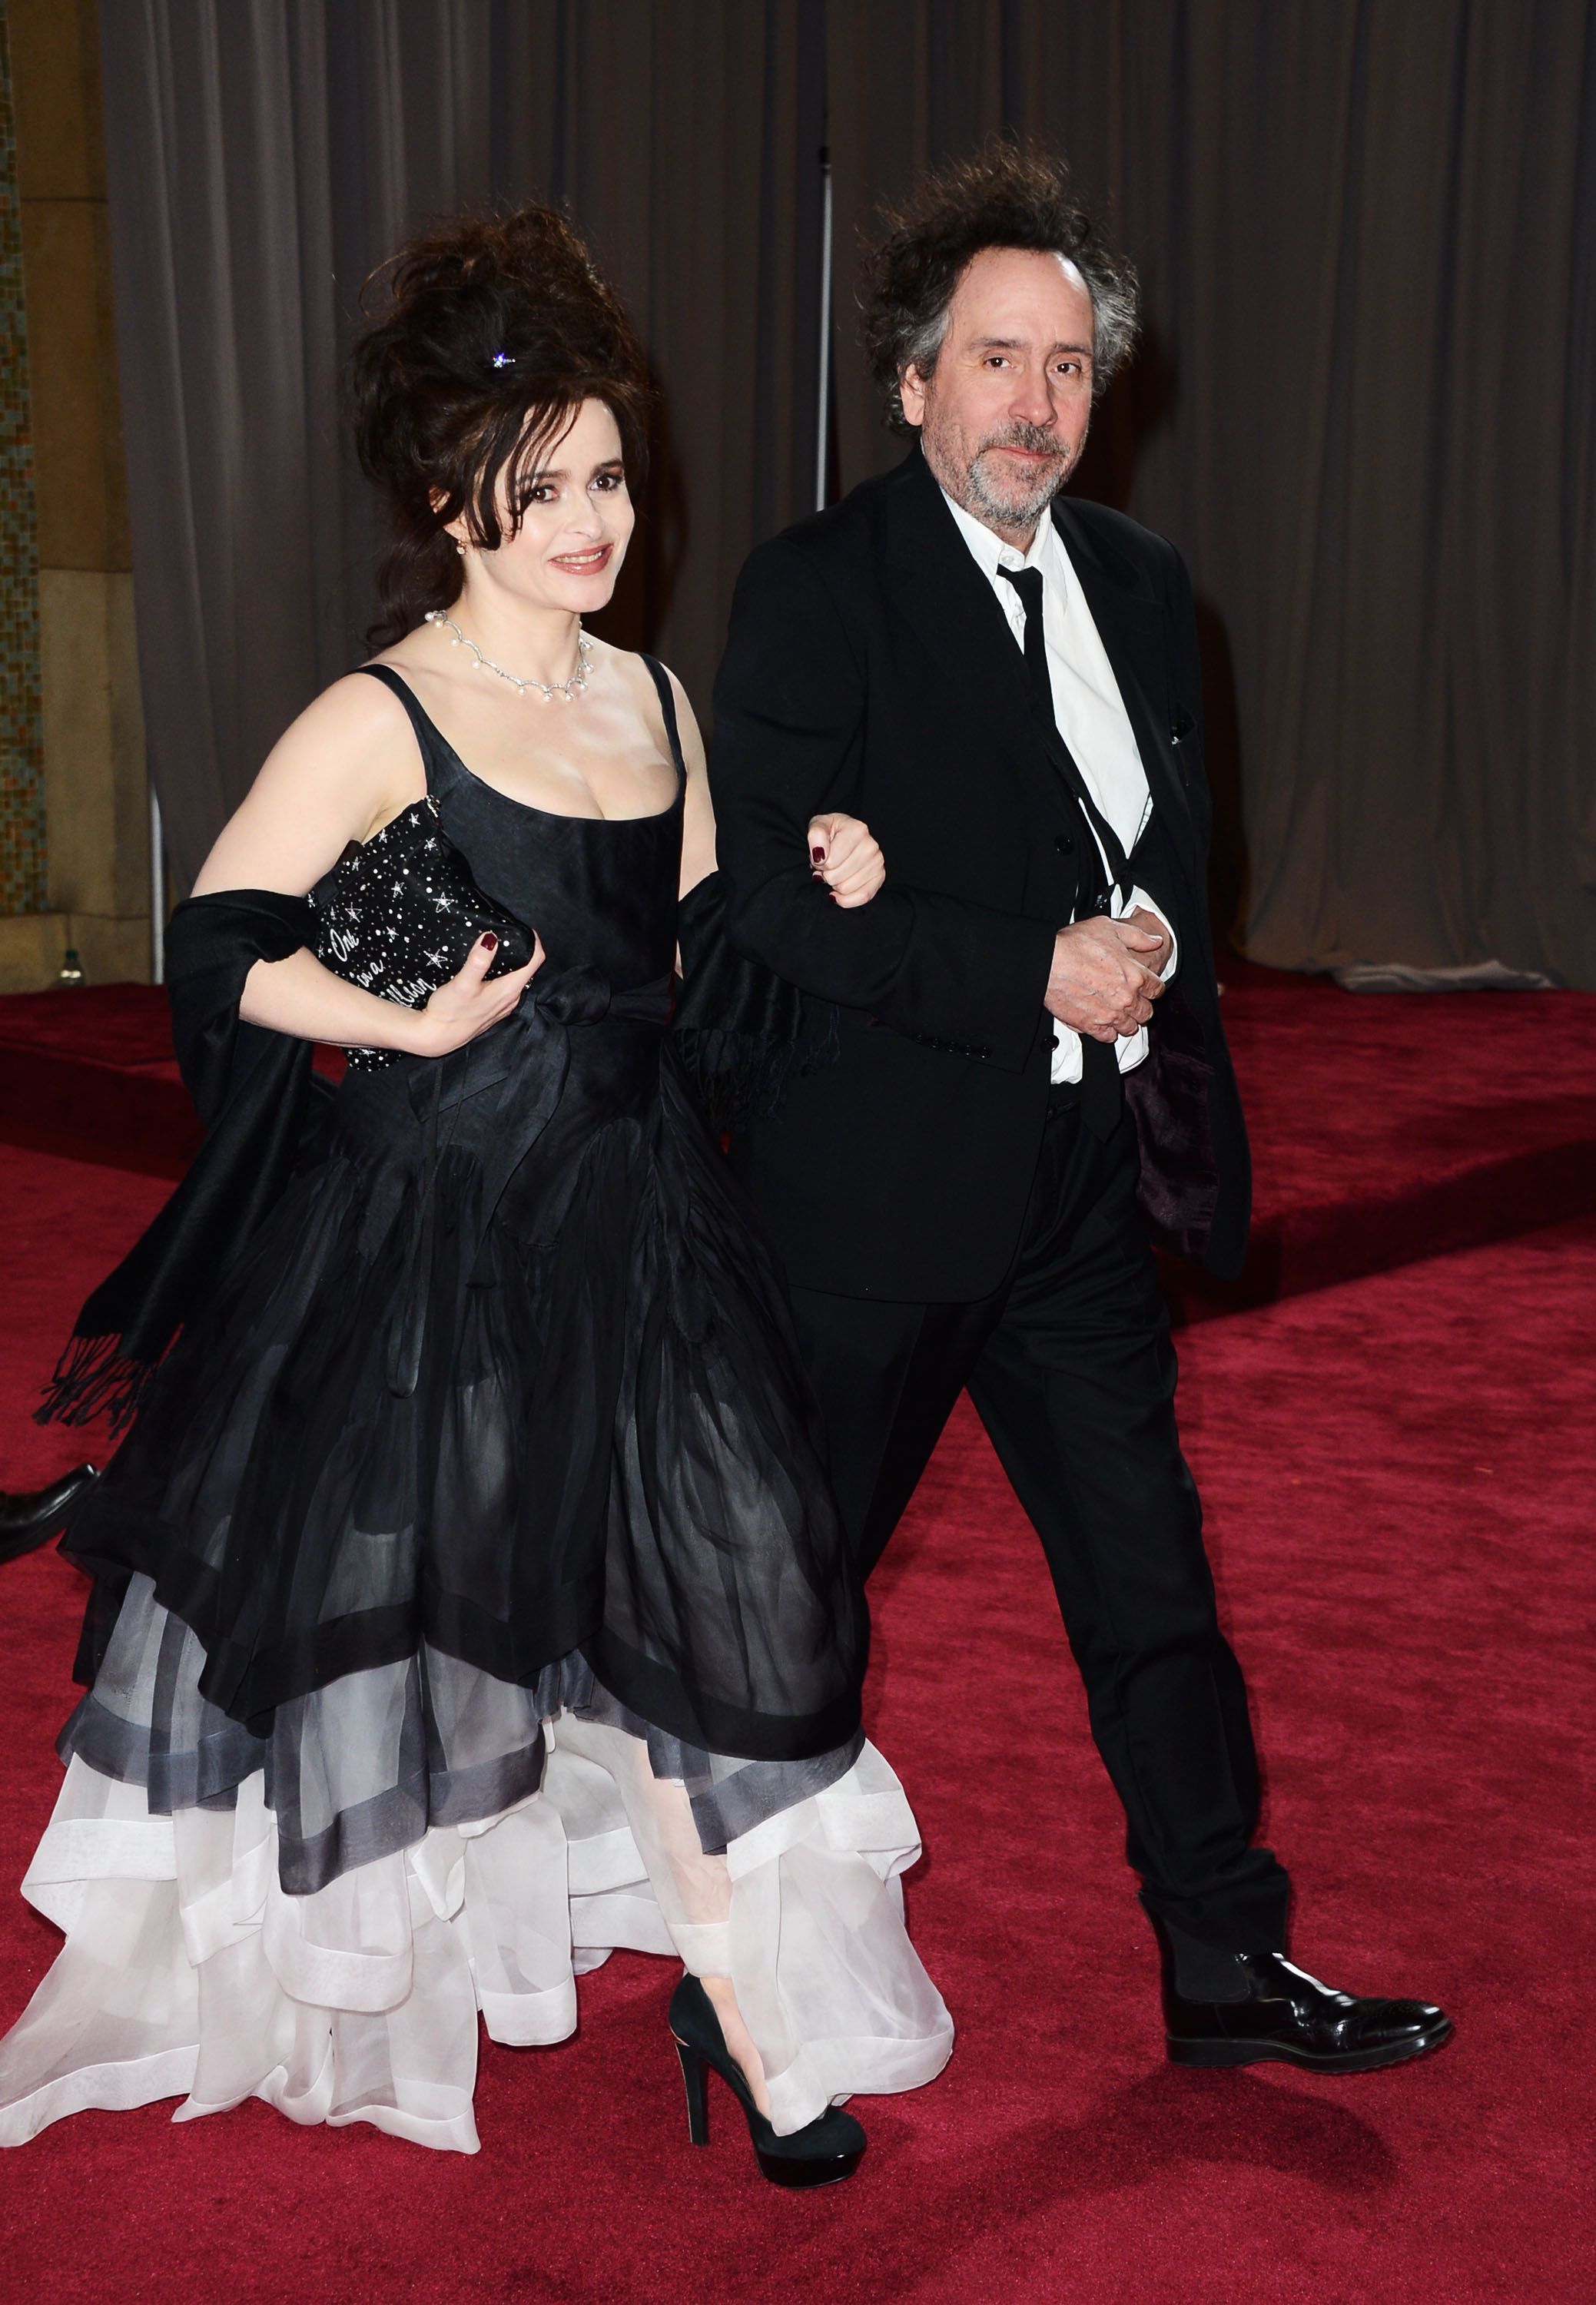 Helena Bonham Carter and Tim Burton during the Oscars at Hollywood & Highland Center on February 24, 2013, in Hollywood, California. | Source: Getty Images